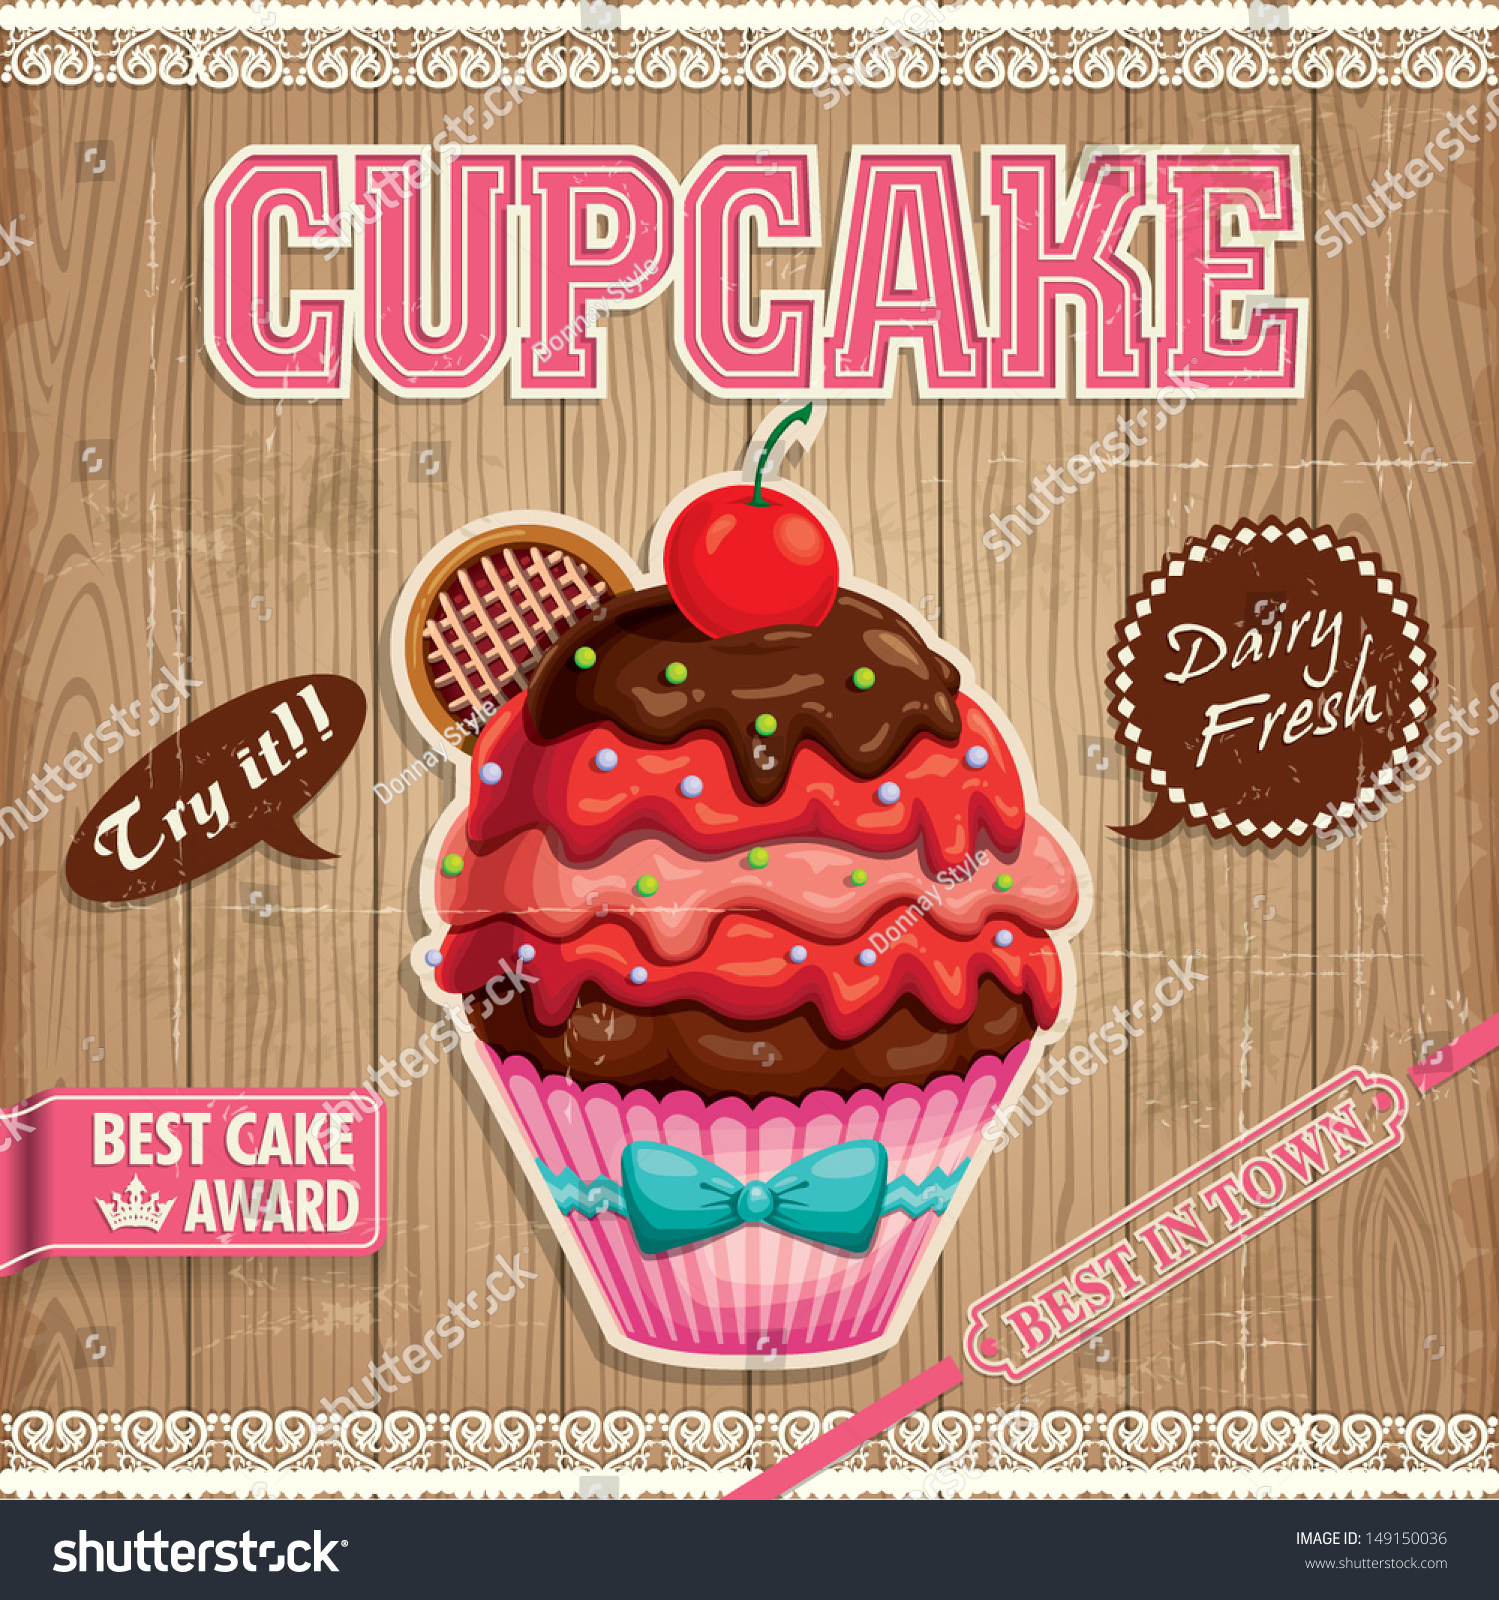 Vintage Cupcake Poster Design With Wood Background Stock ...